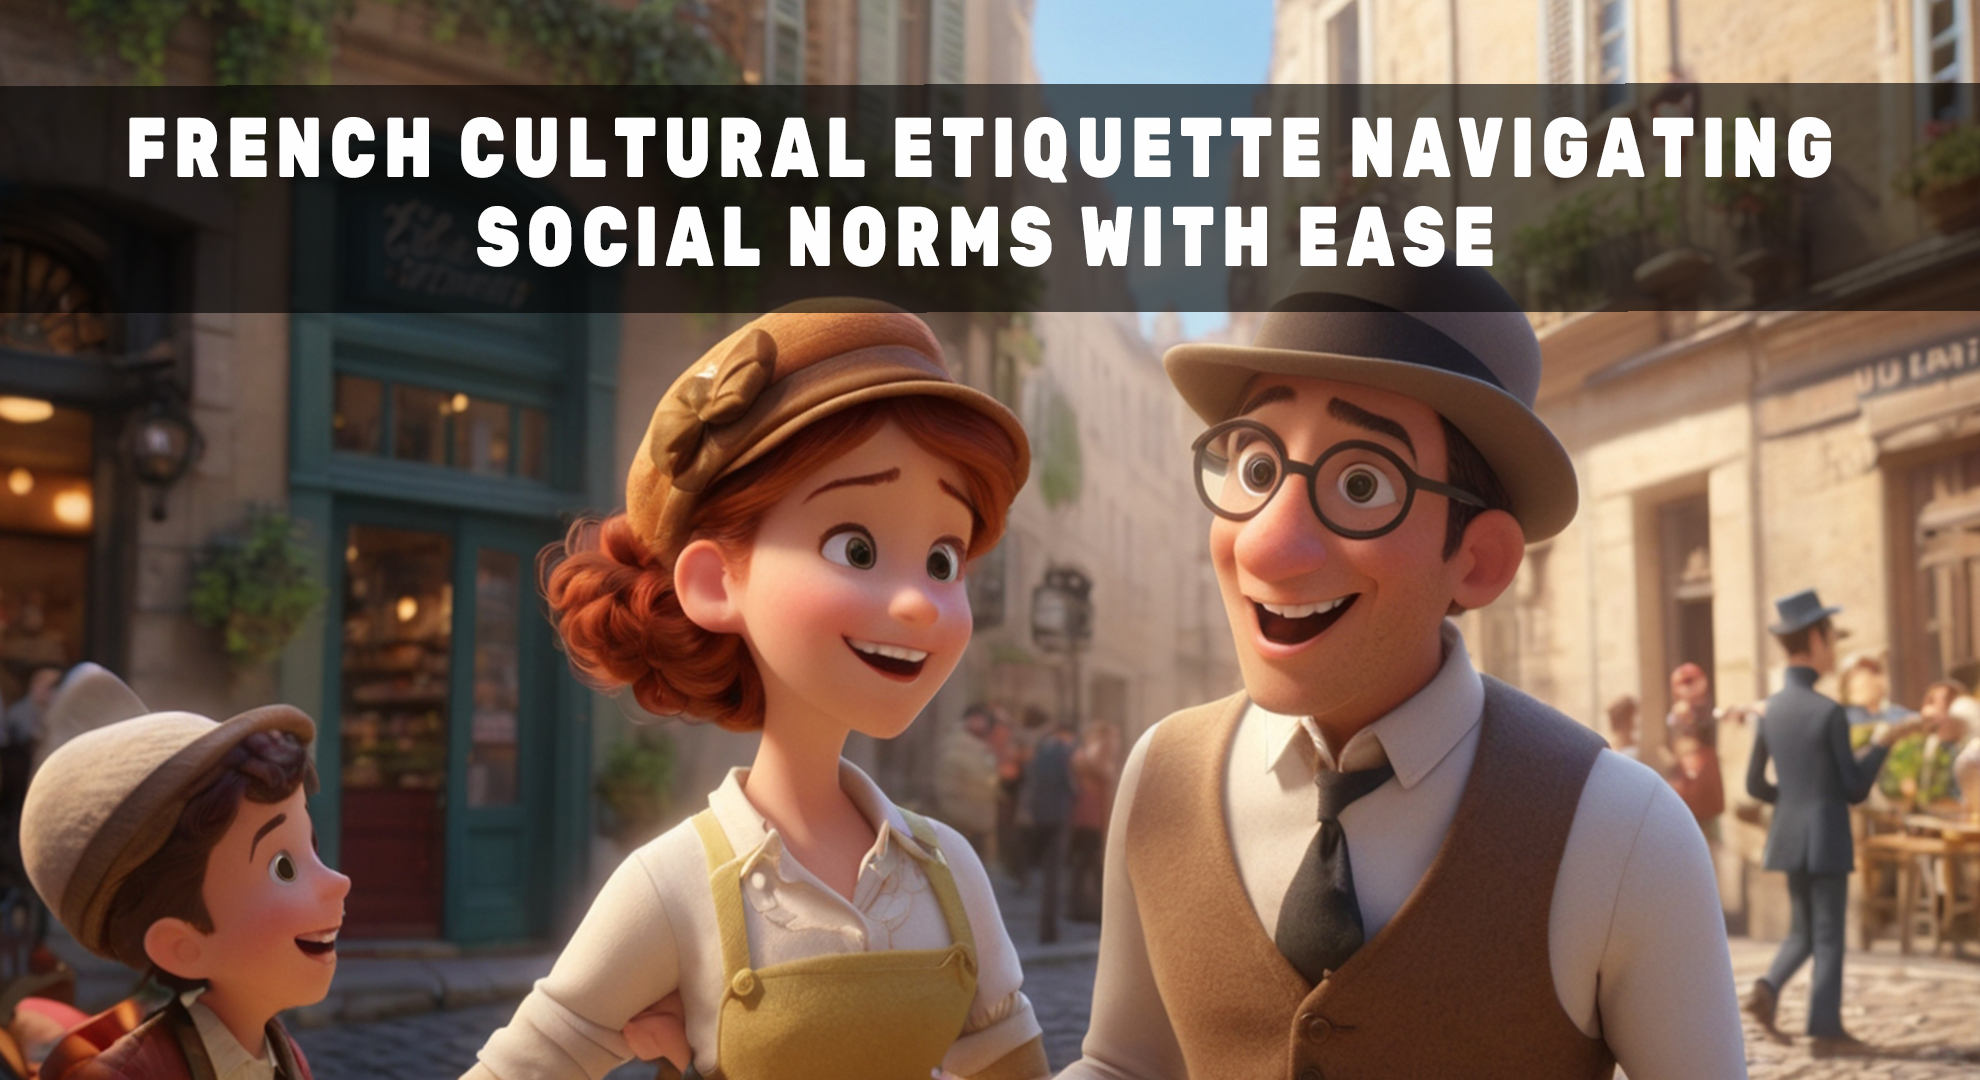 French Cultural Etiquette Navigating Social Norms with Ease